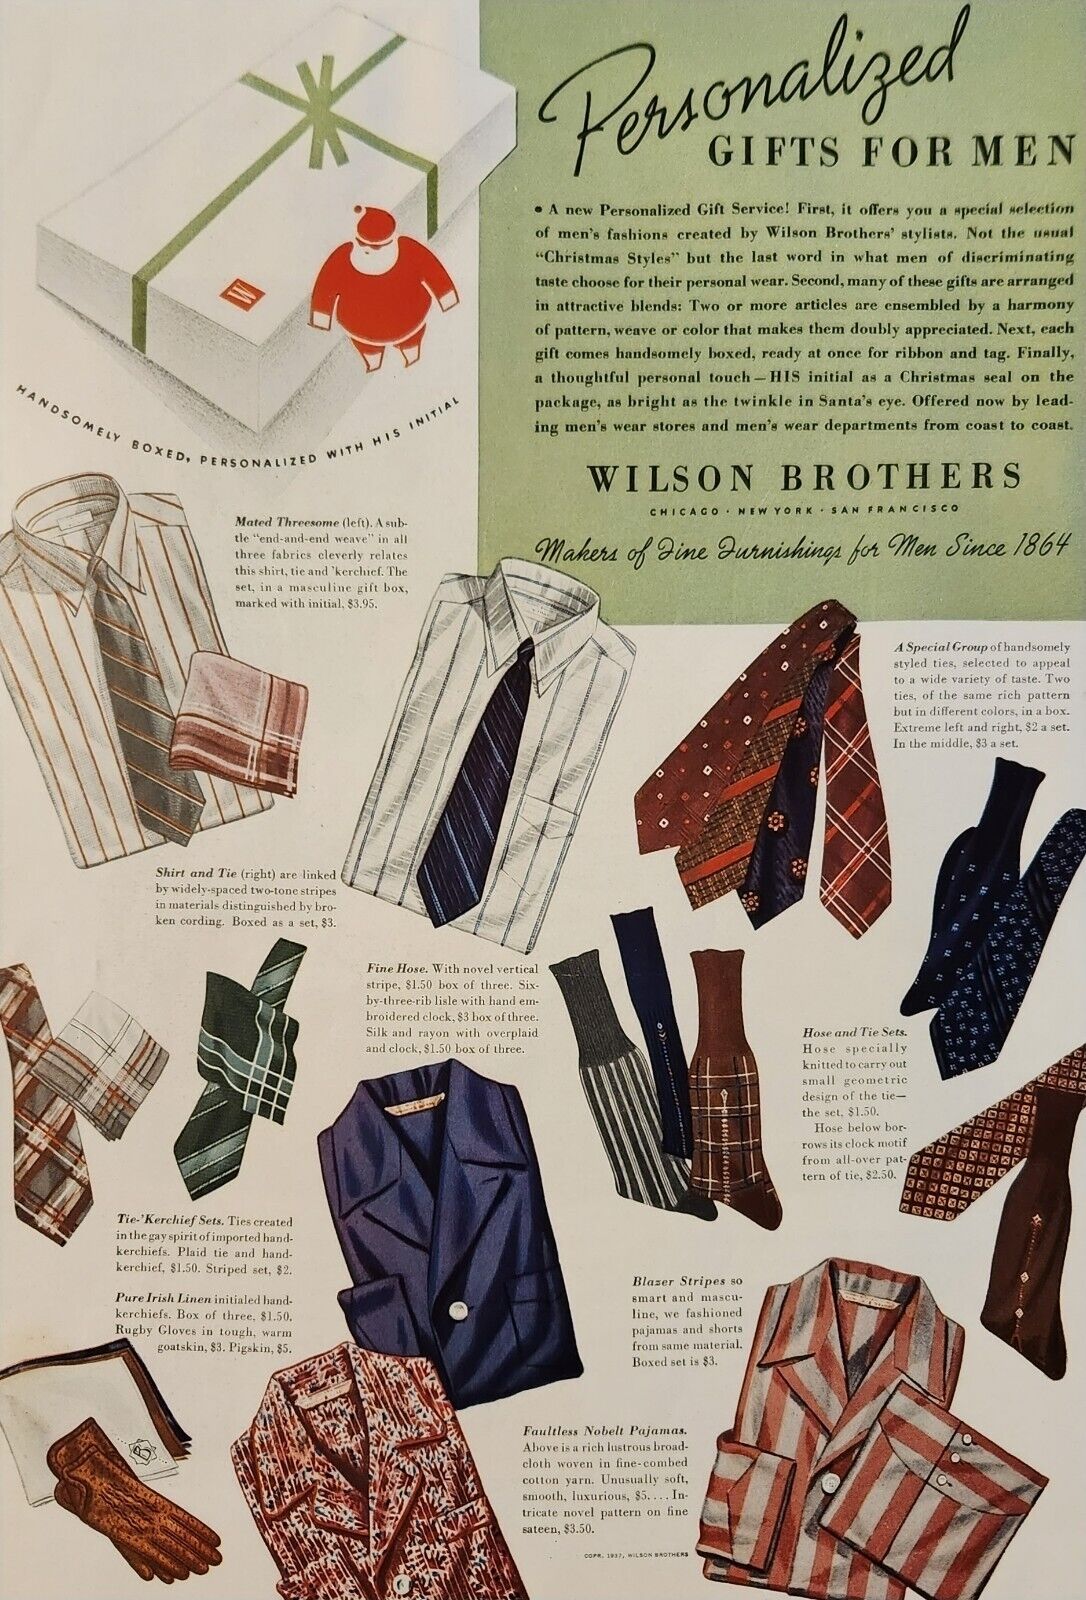 1937 Wilson Brothers Gifts for men Vintage Ad Personalized